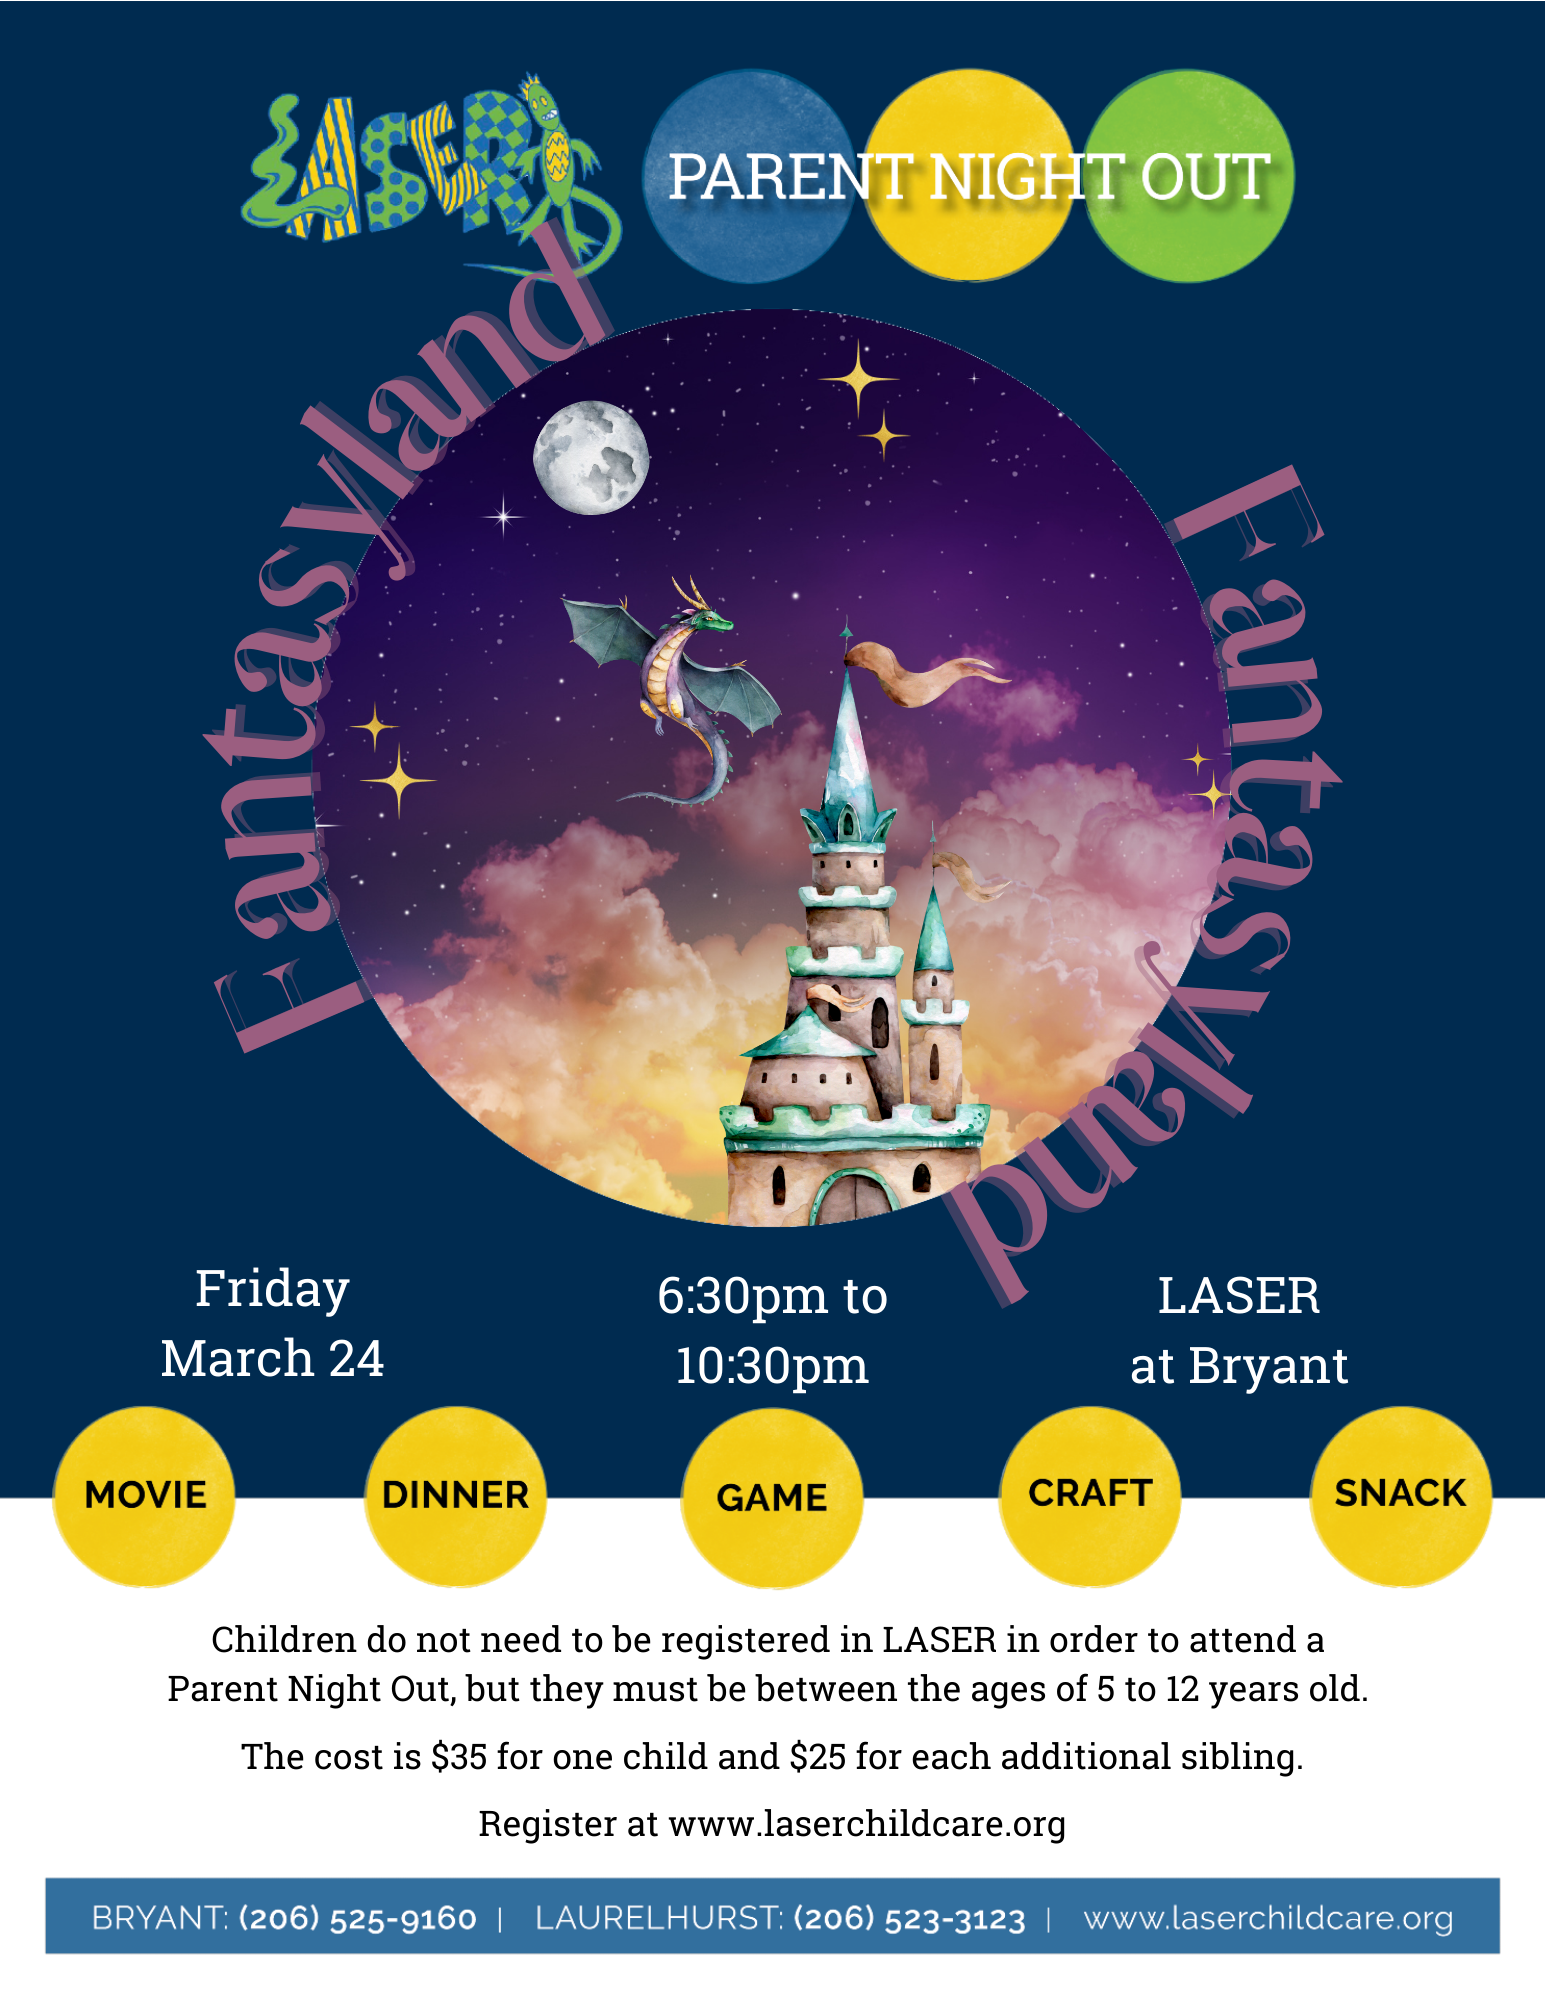 Laser Parent Night Out - March 24